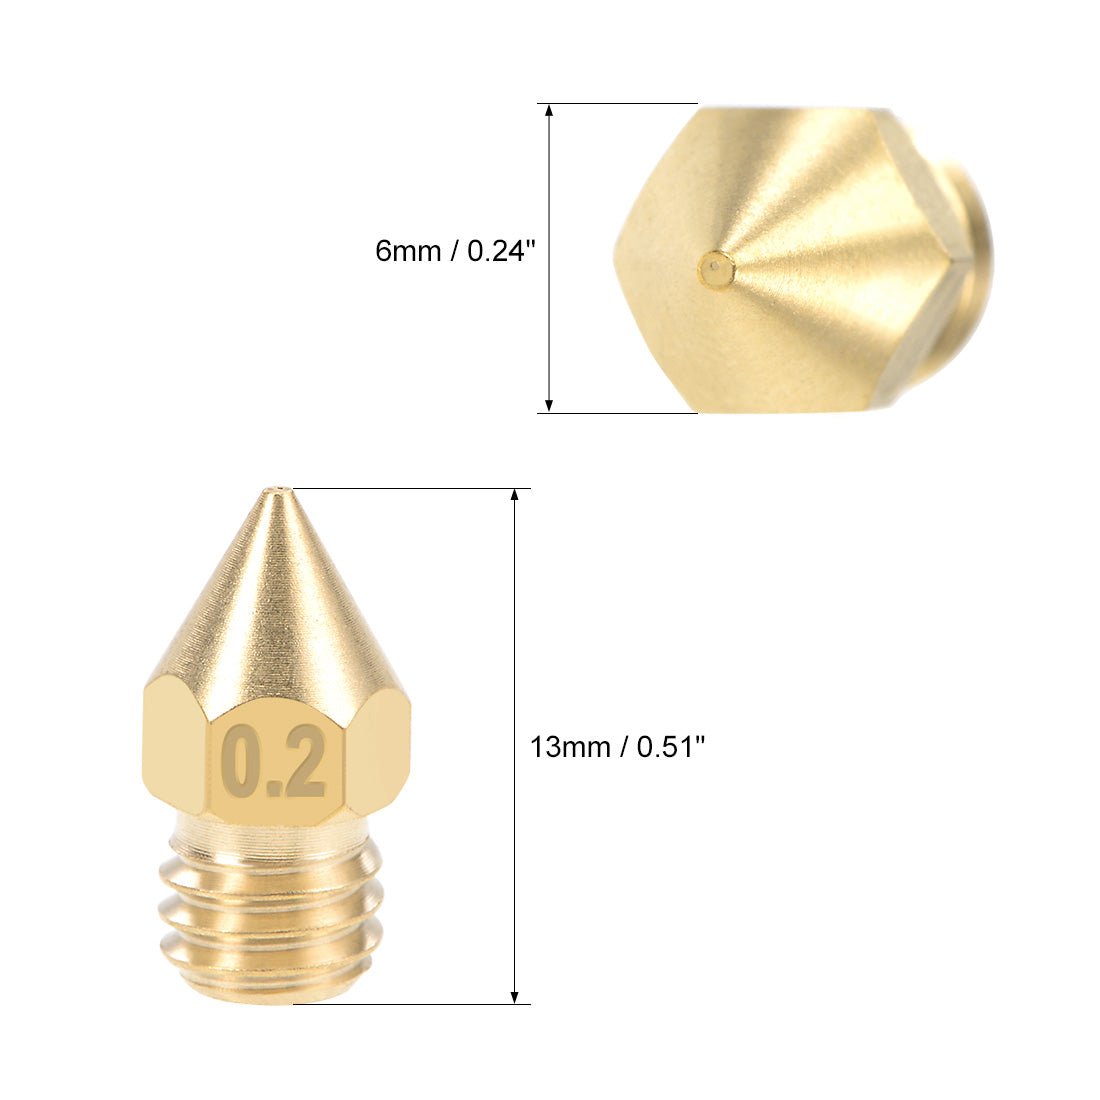 uxcell Uxcell 0.2mm 3D Printer Nozzle Head M6 for MK8 1.75mm Extruder Print, Brass 5pcs